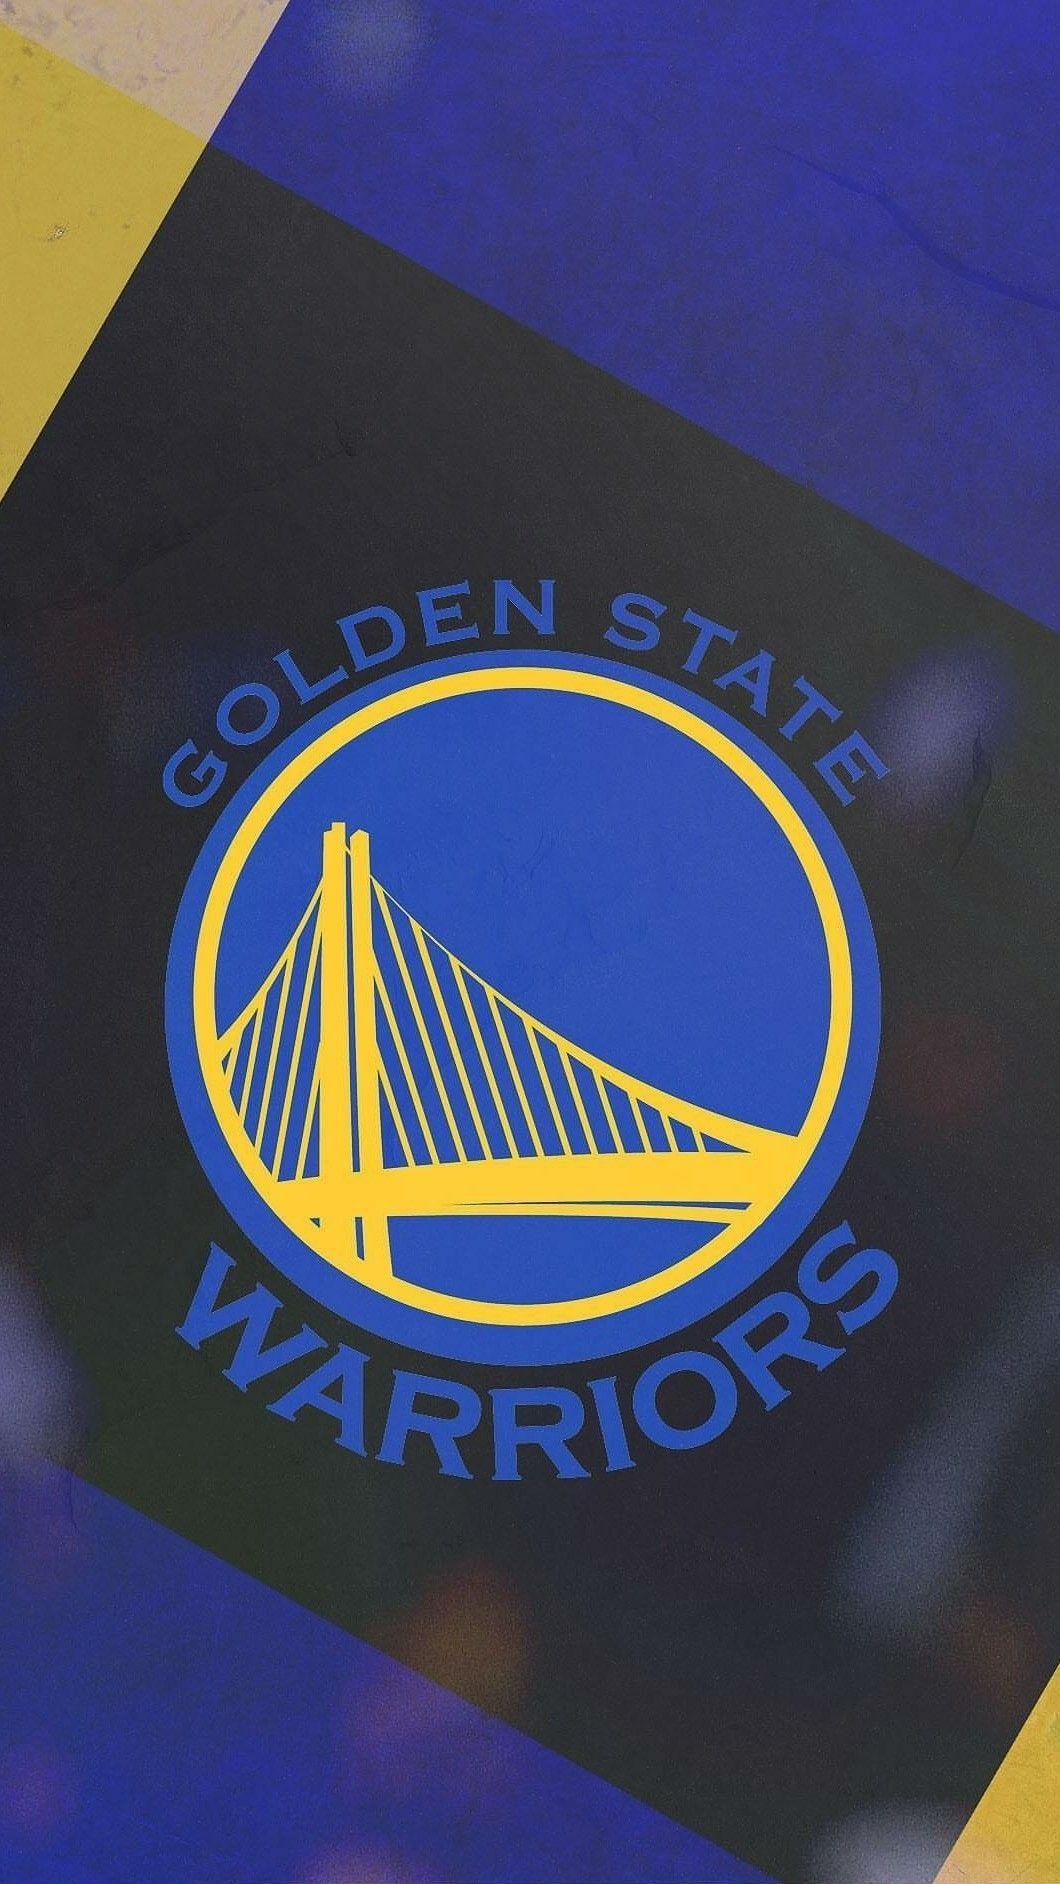 Free download Golden State Warriors Iphone Wallpaper Golden state warriors  640x960 for your Desktop Mobile  Tablet  Explore 46 Warriors iPhone  Wallpaper  Ronin Warriors Wallpaper Dynasty Warriors Wallpapers Dynasty Warriors  Wallpaper